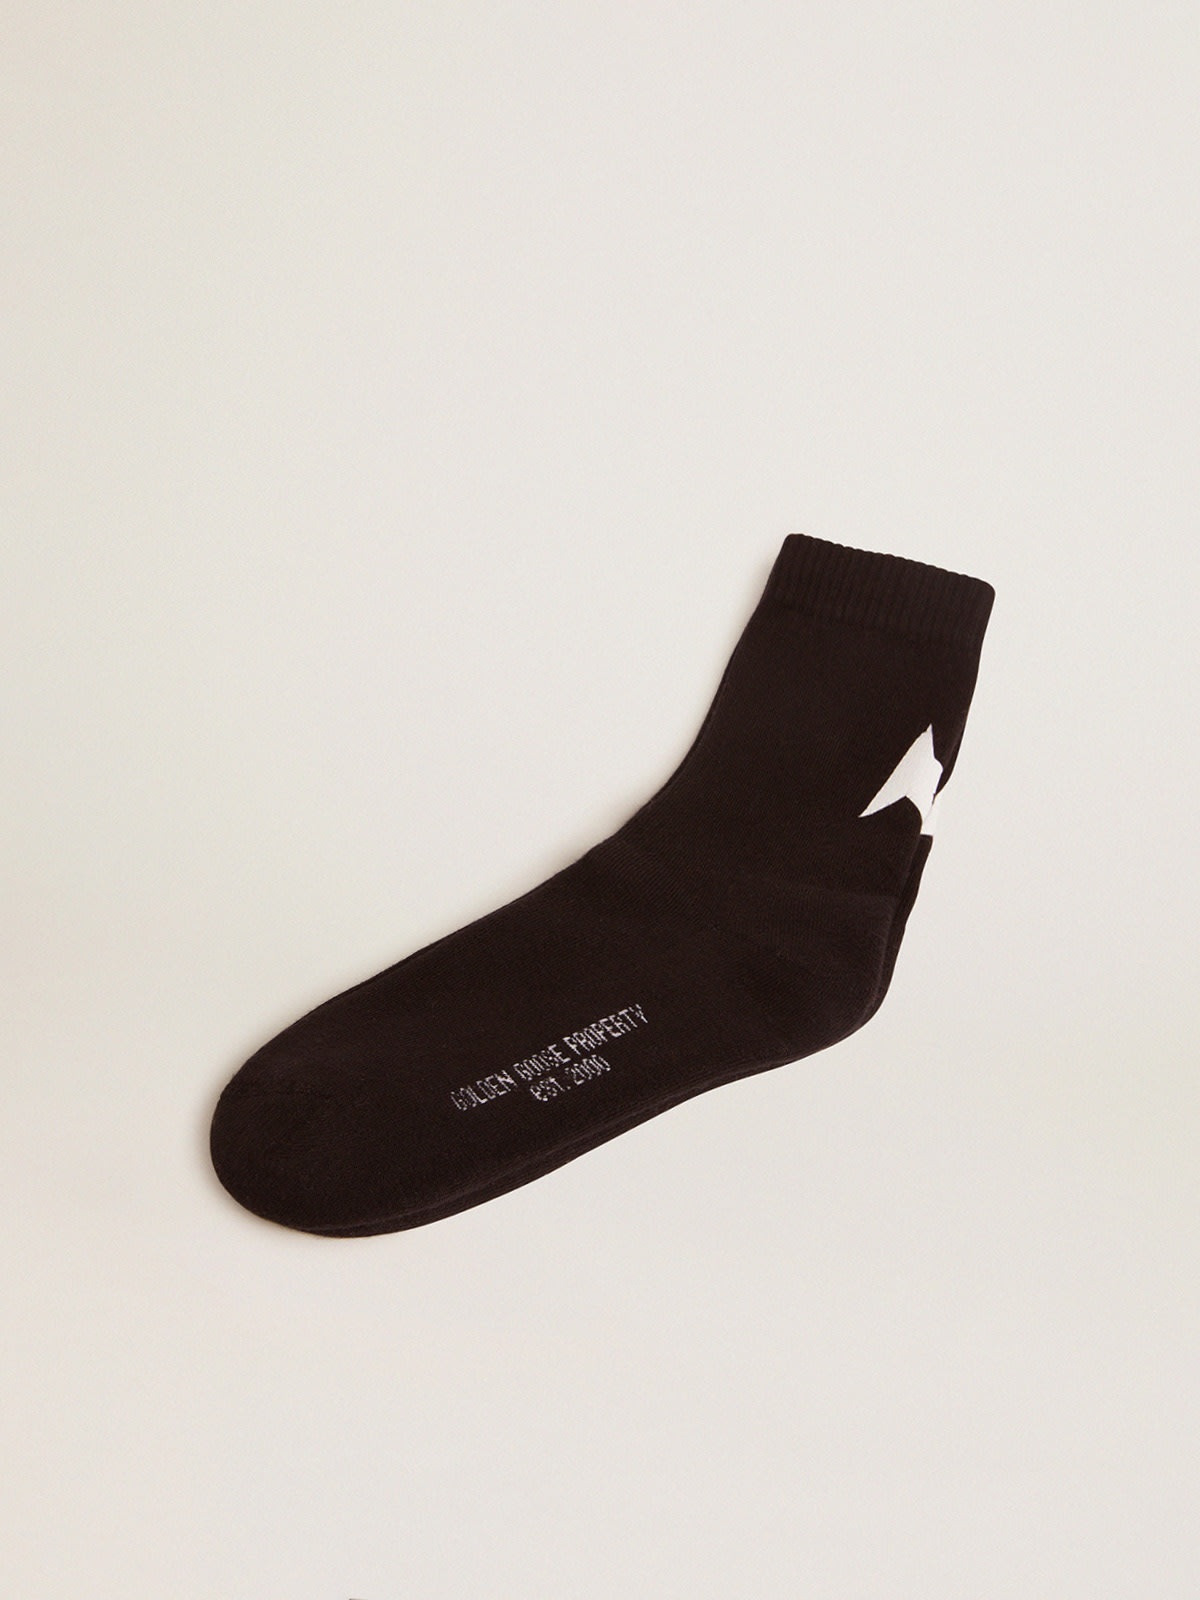 Black Star Collection socks with contrasting white star - 1